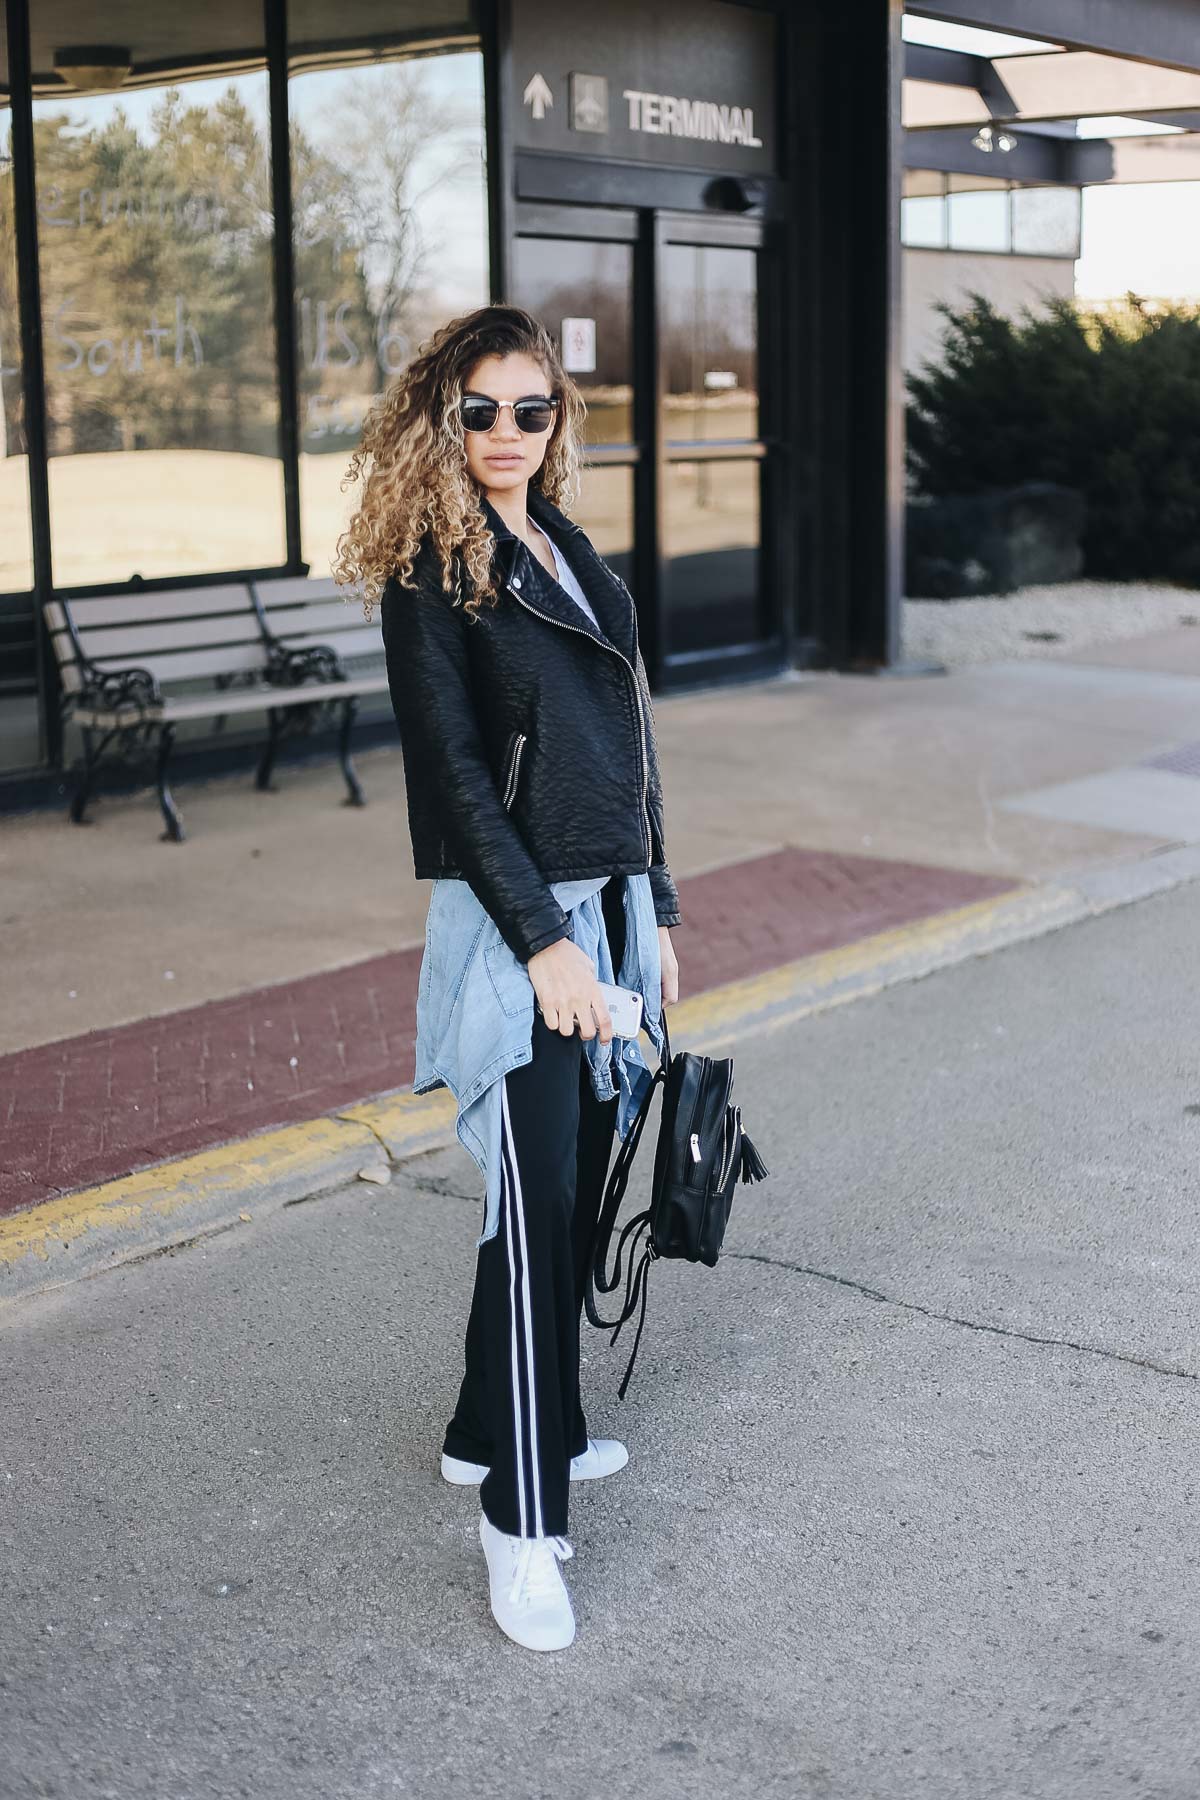 comfy airport outfit with track pants and a motorcycle jacket